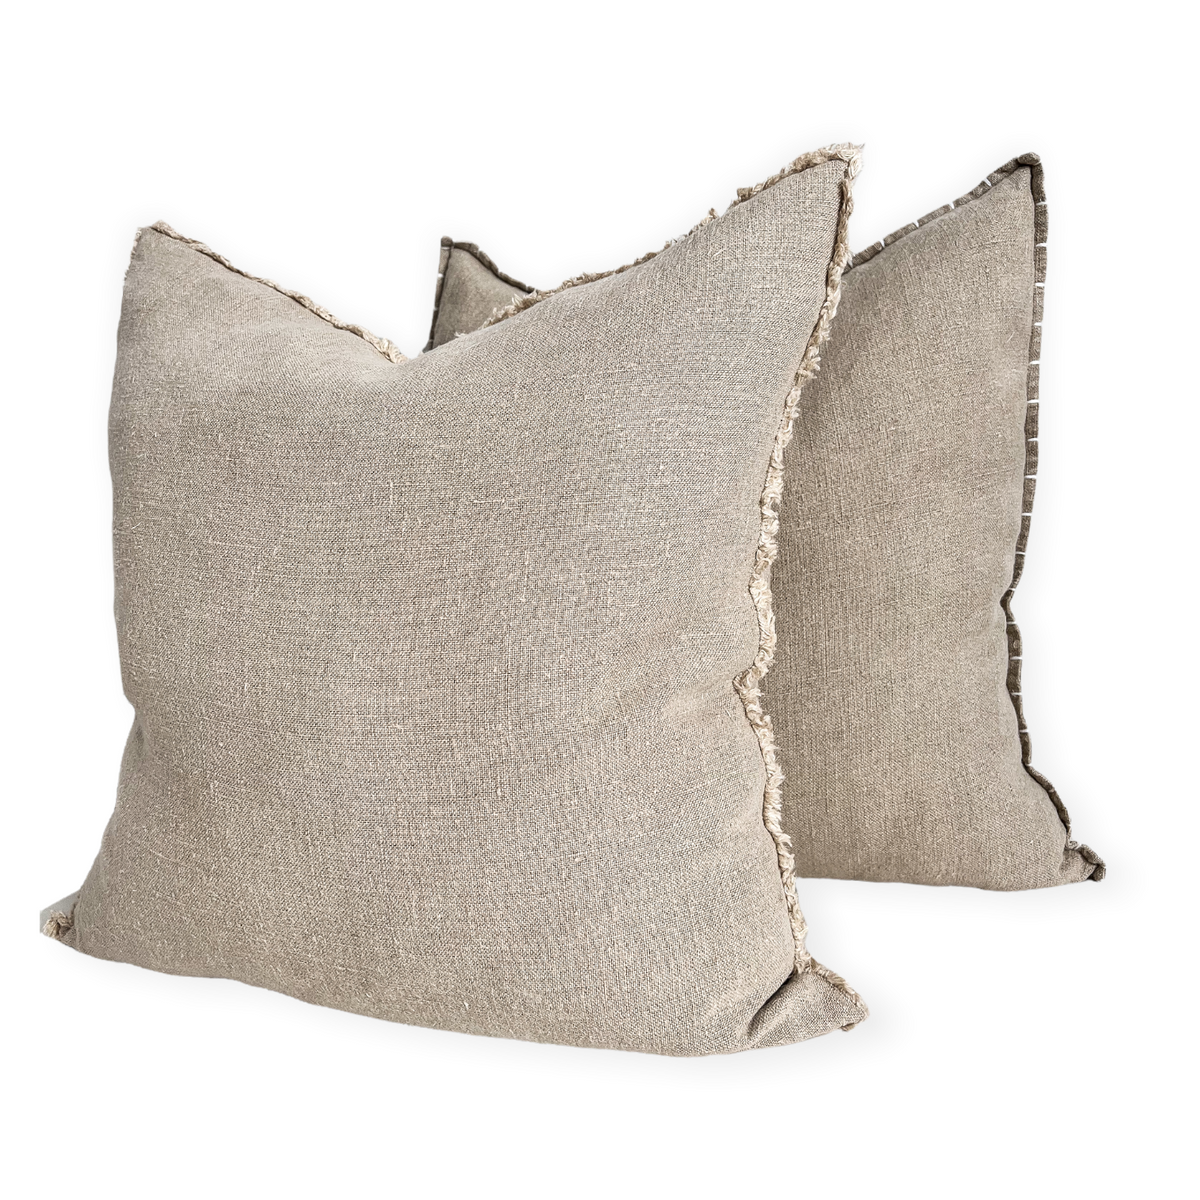 Natural heavy linen, 350gsm cushion covers available in a raw fringe edge or embroidered. Pure quality linen in natural earthy colours with a rustic stonewash finish. 50cm throwrug also available 